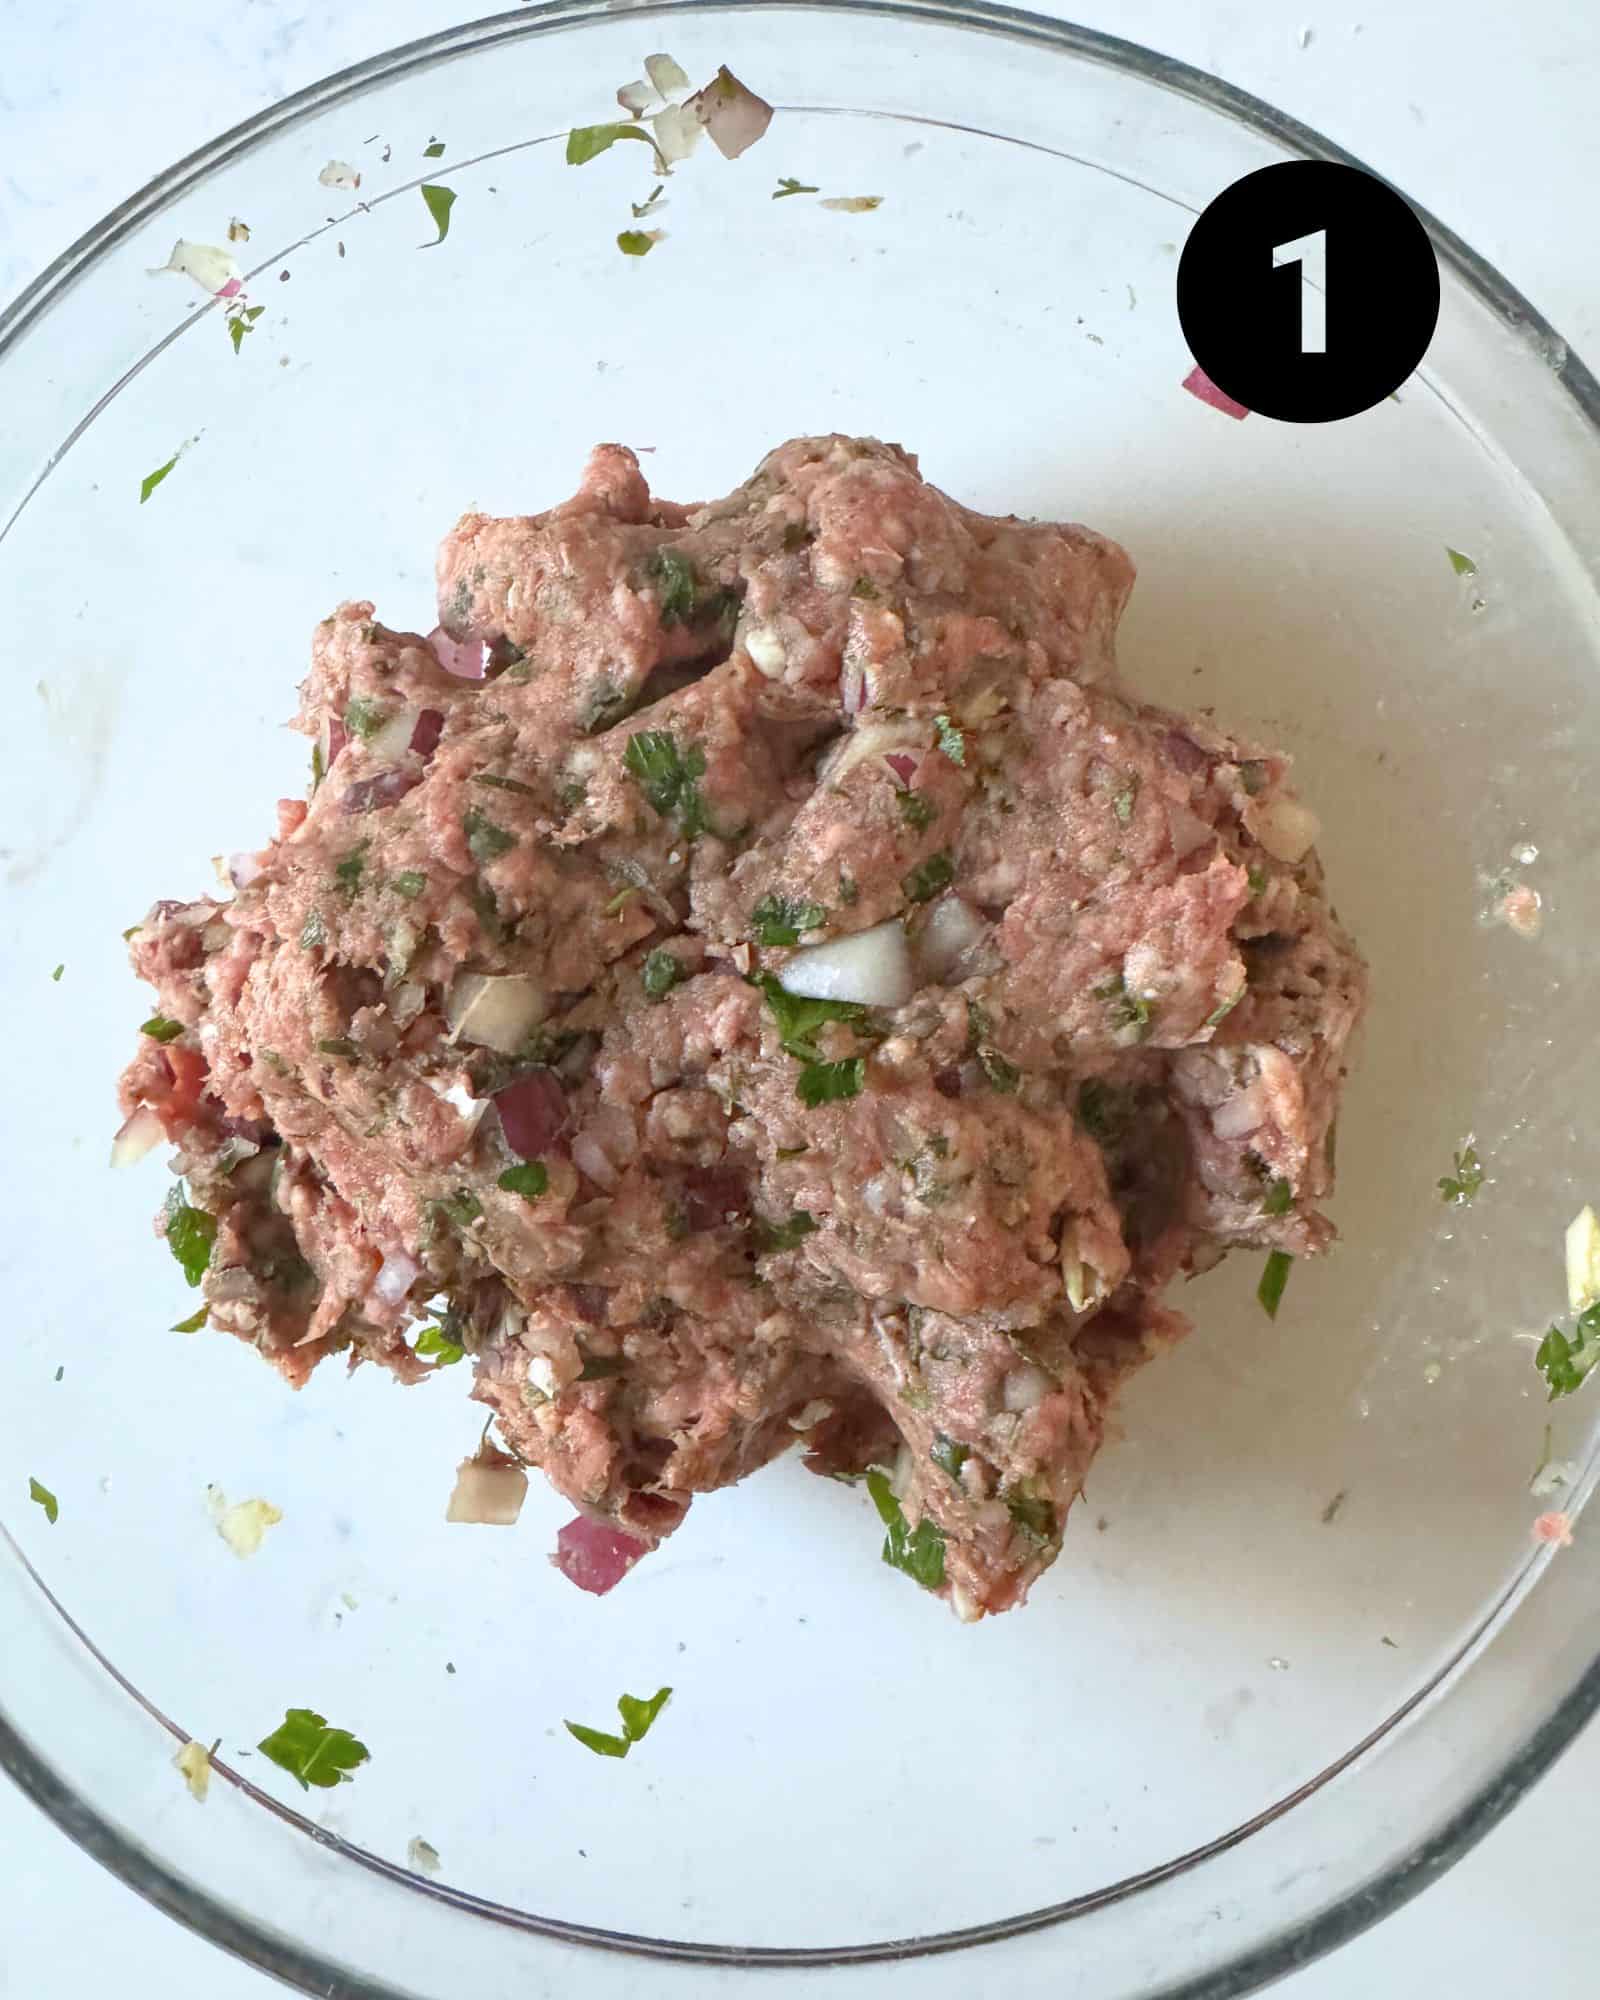 meatball ingredients mixed together in a mixing bowl.